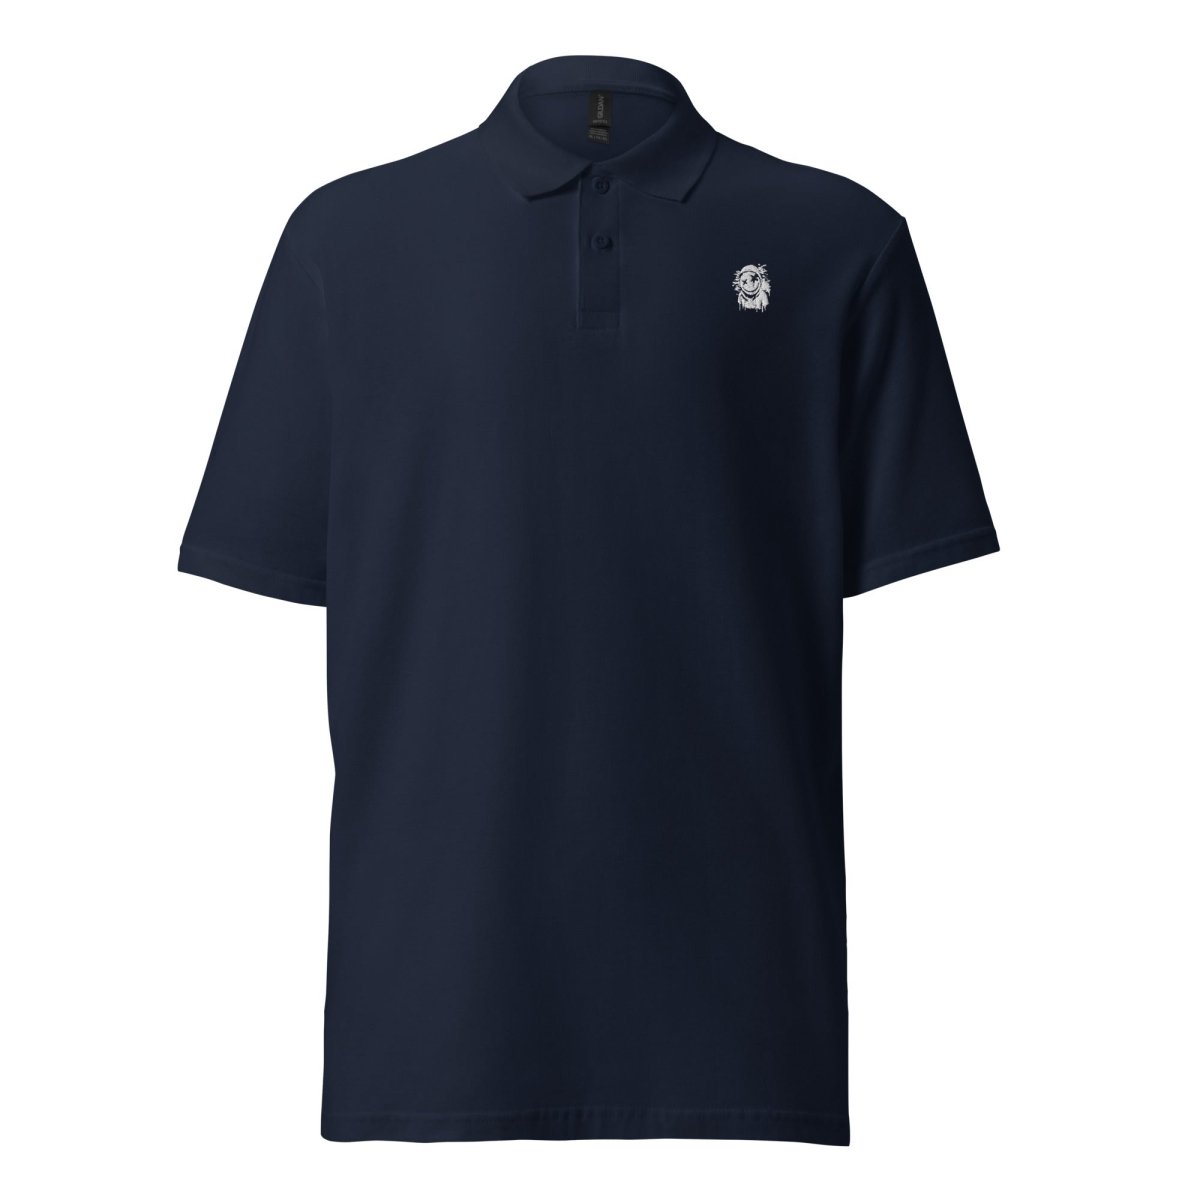 MH Classic Polo Navy - Mainly High